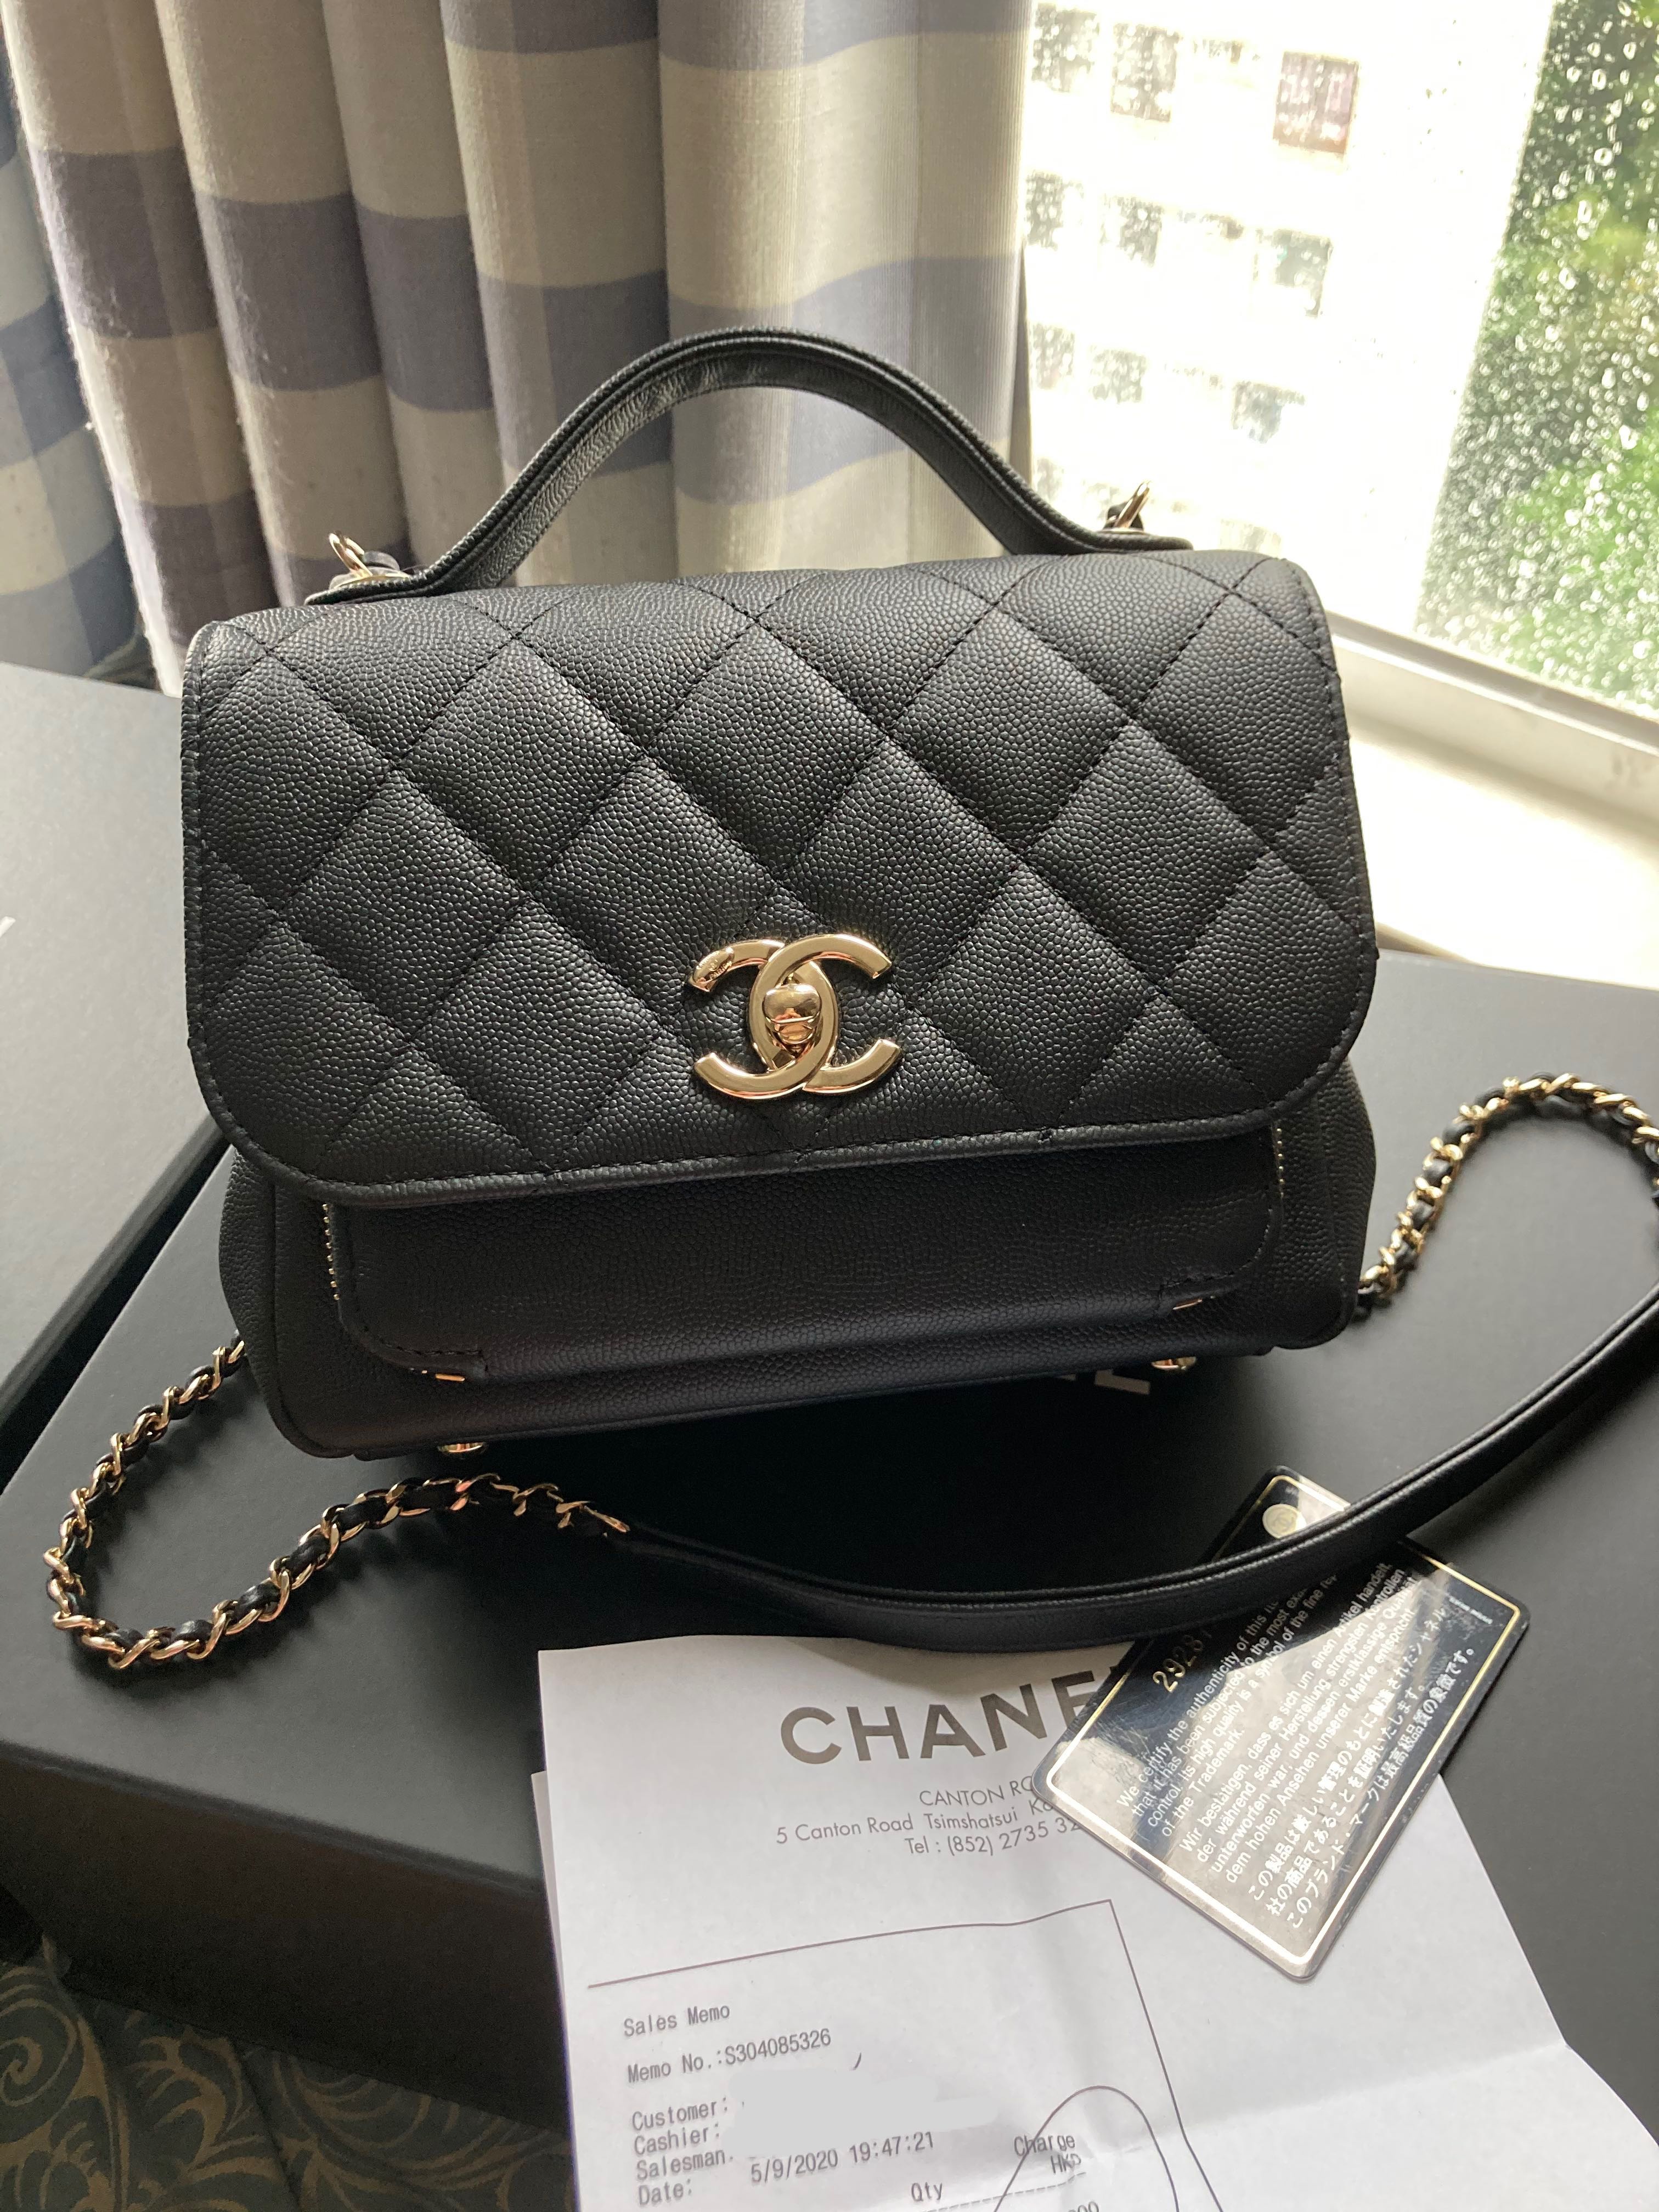 Chanel Business Affinity Bag Review & What Fits & Pros and Cons